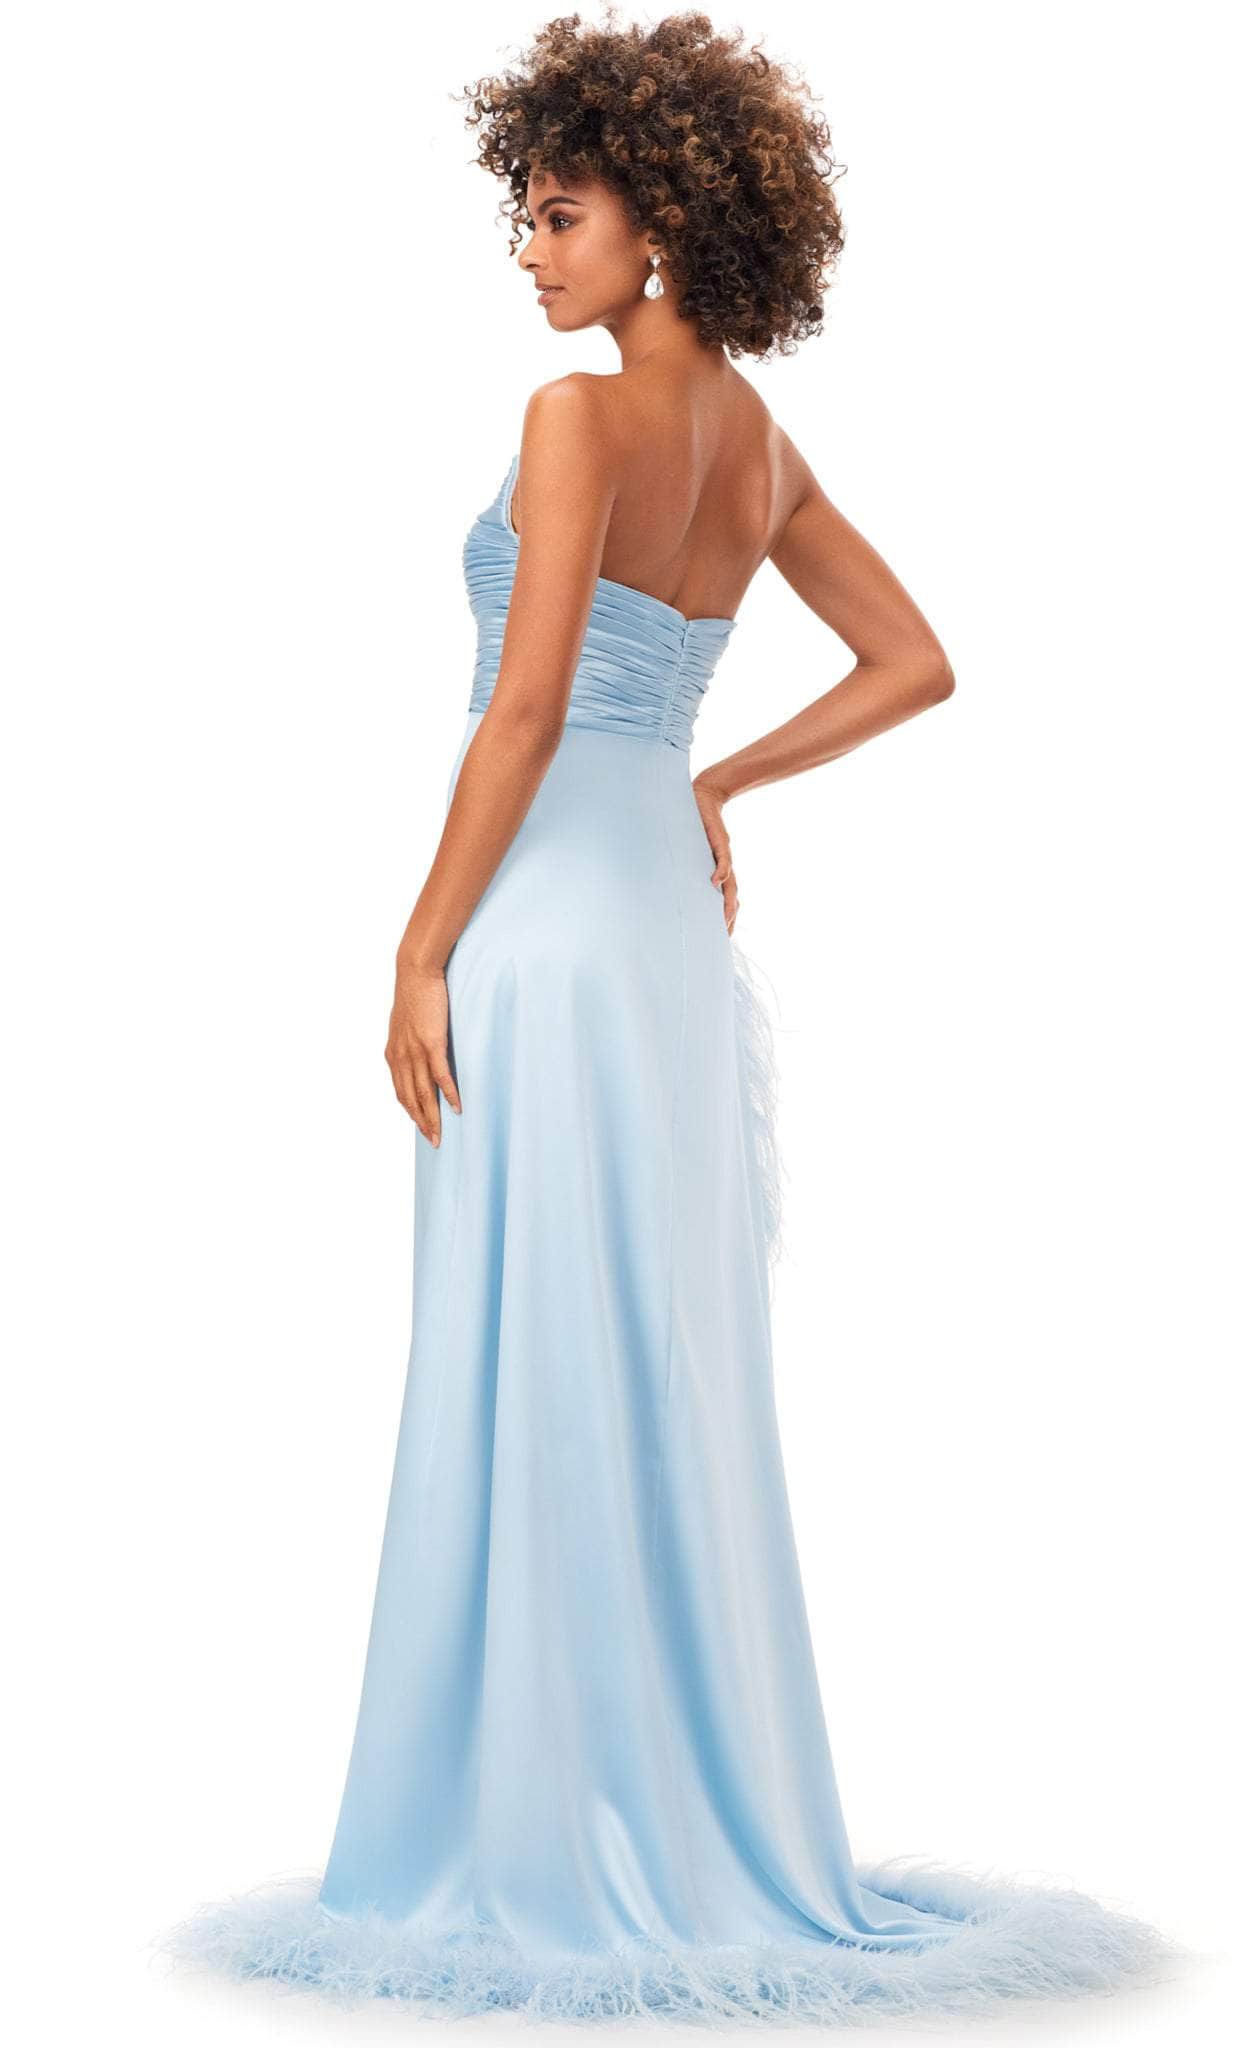 Ashley Lauren 11313 - Ruched Strapless Prom Gown Special Occasion Dress